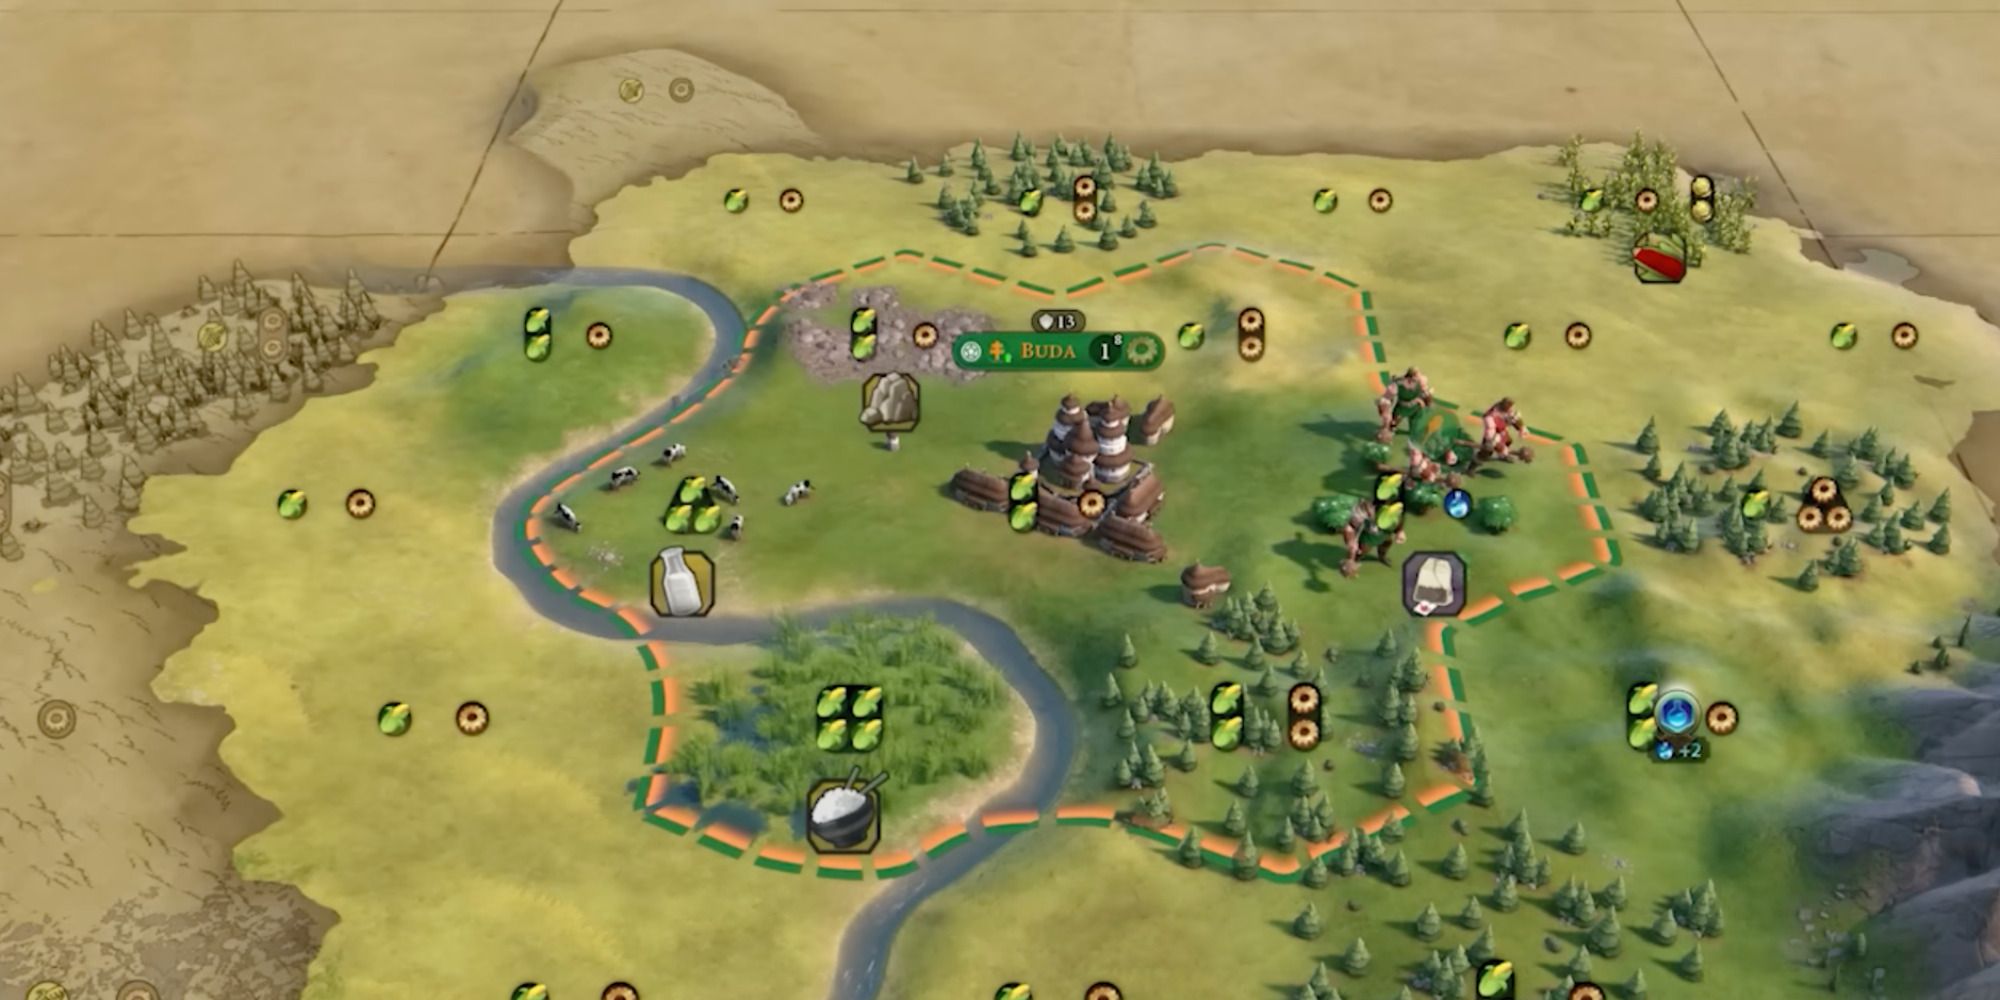 Starting a new Civilization 6 game as the Hungarian Empire